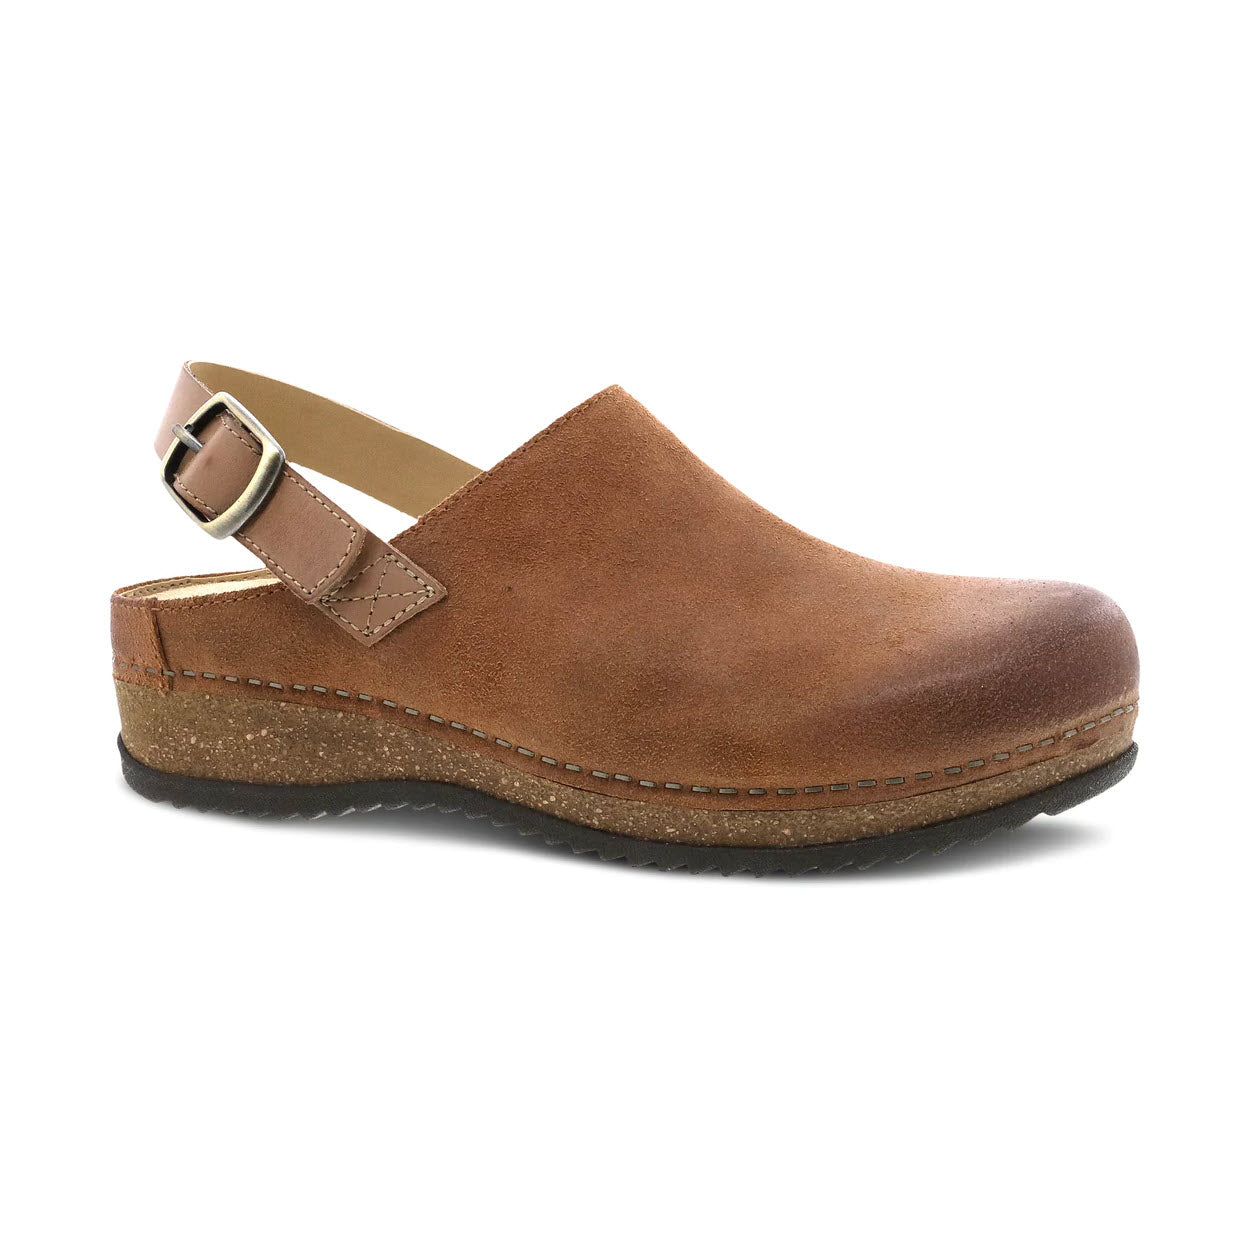 A single Dansko Merrin Tan women's clog with a heel strap and sustainable cork base, isolated on a white background.